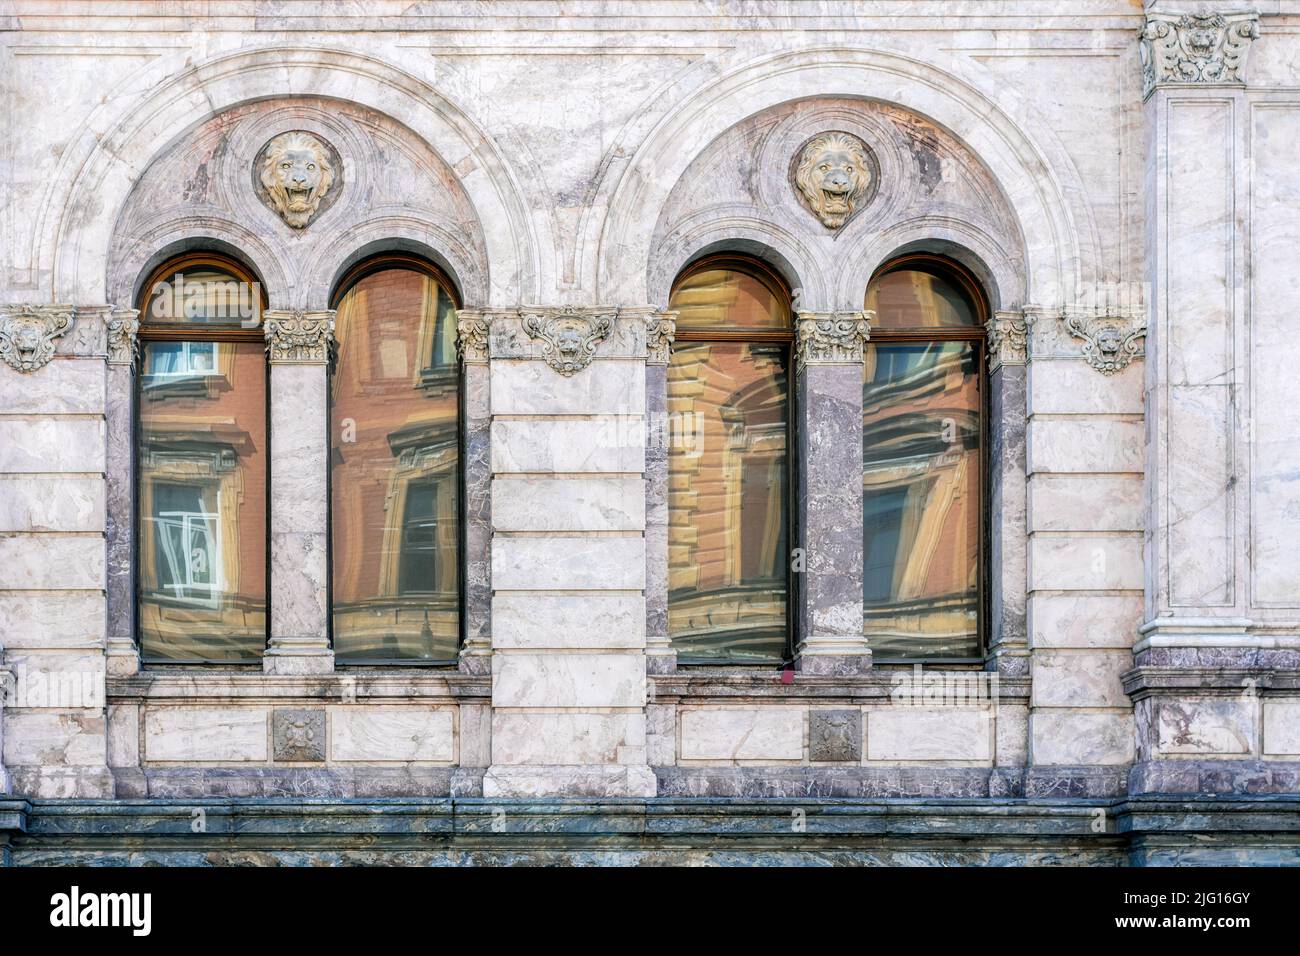 Four arched windows with a bas-relief of a lion's head against a marble stone wall. From the Windows of the world series. Stock Photo